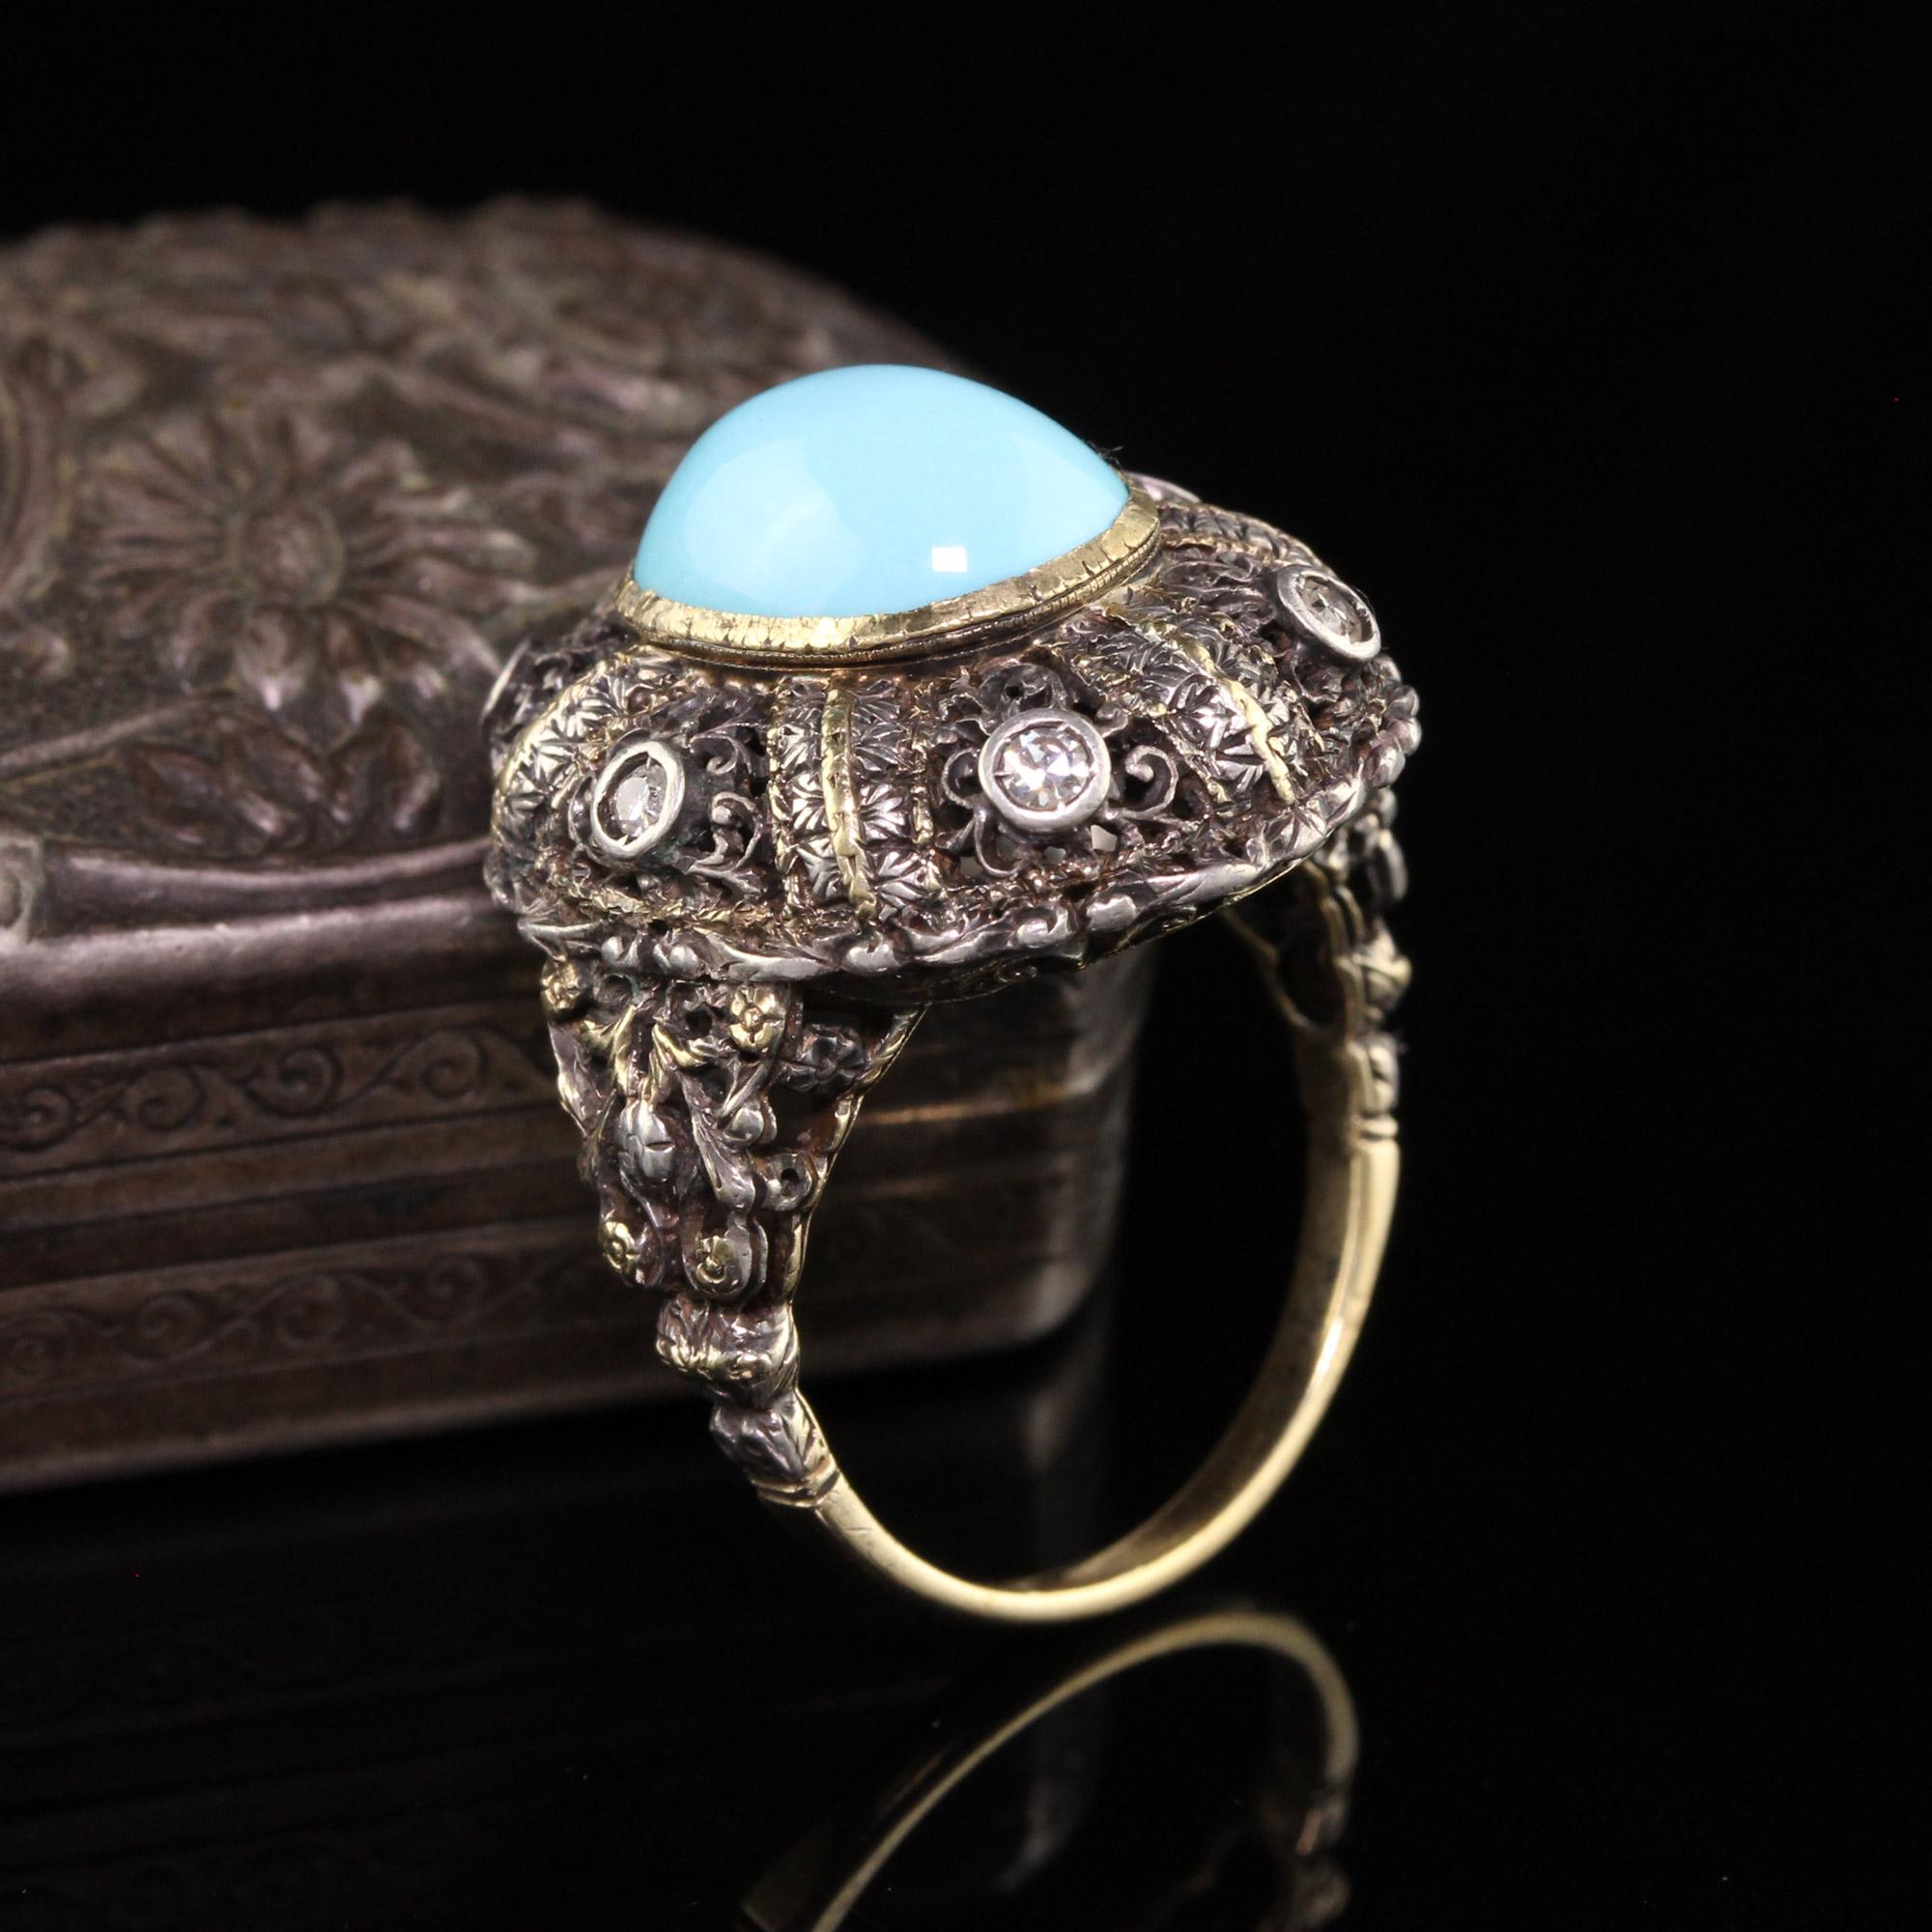 Beautiful Antique Art Deco 18K Yellow Gold Silver Top Turquoise Cabochon Ring. This gorgeous ring features a nice cabochon turquoise set in a filigree mounting with single cut stones set in it.

Item #R0847

Metal: 18K Yellow Gold and Silver